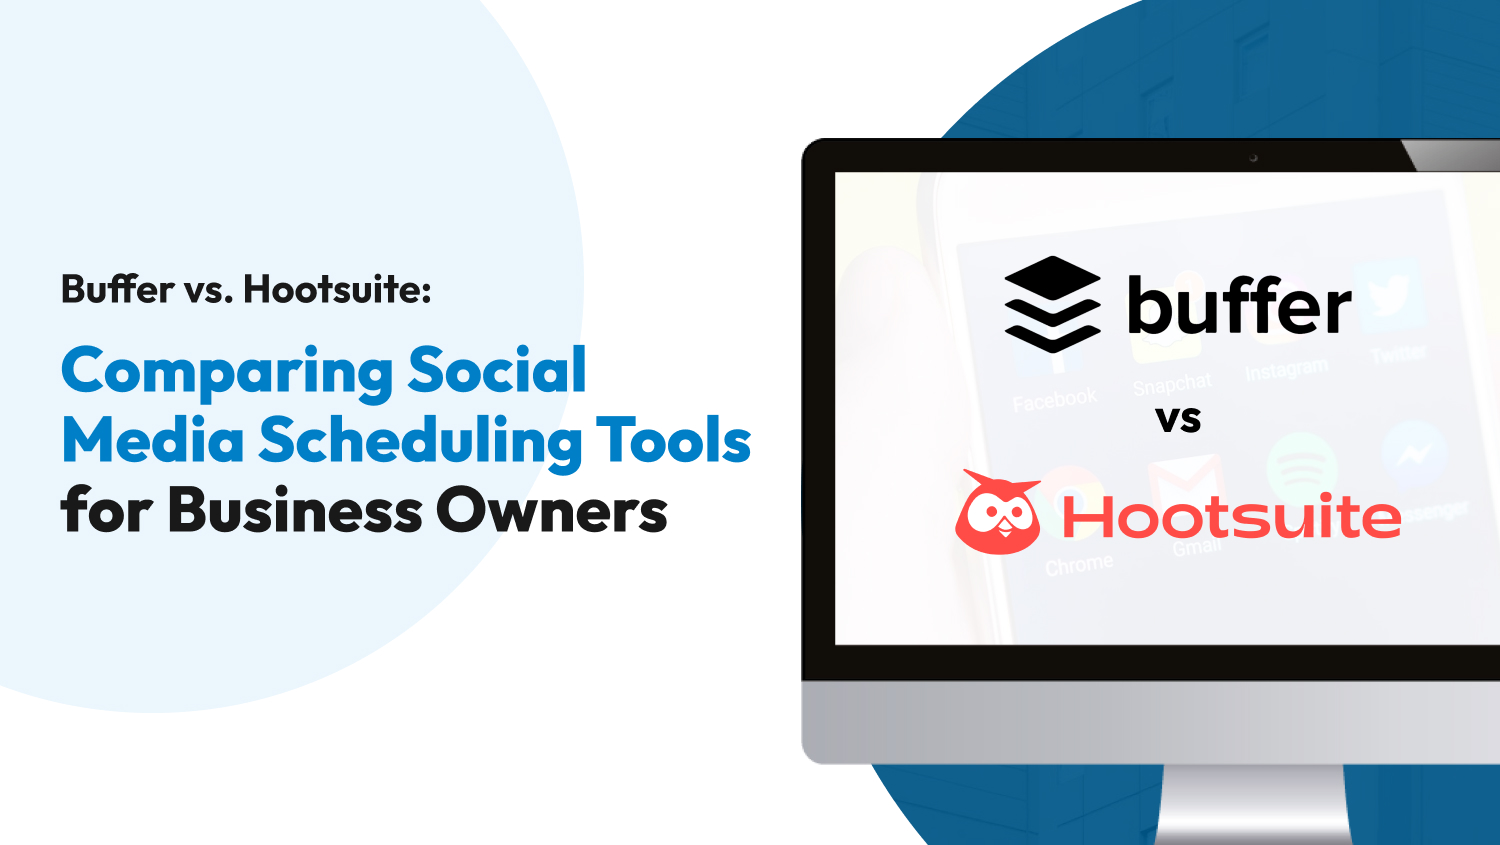 Buffer vs. Hootsuite: Comparing Social Media Scheduling Tools for Business Owners